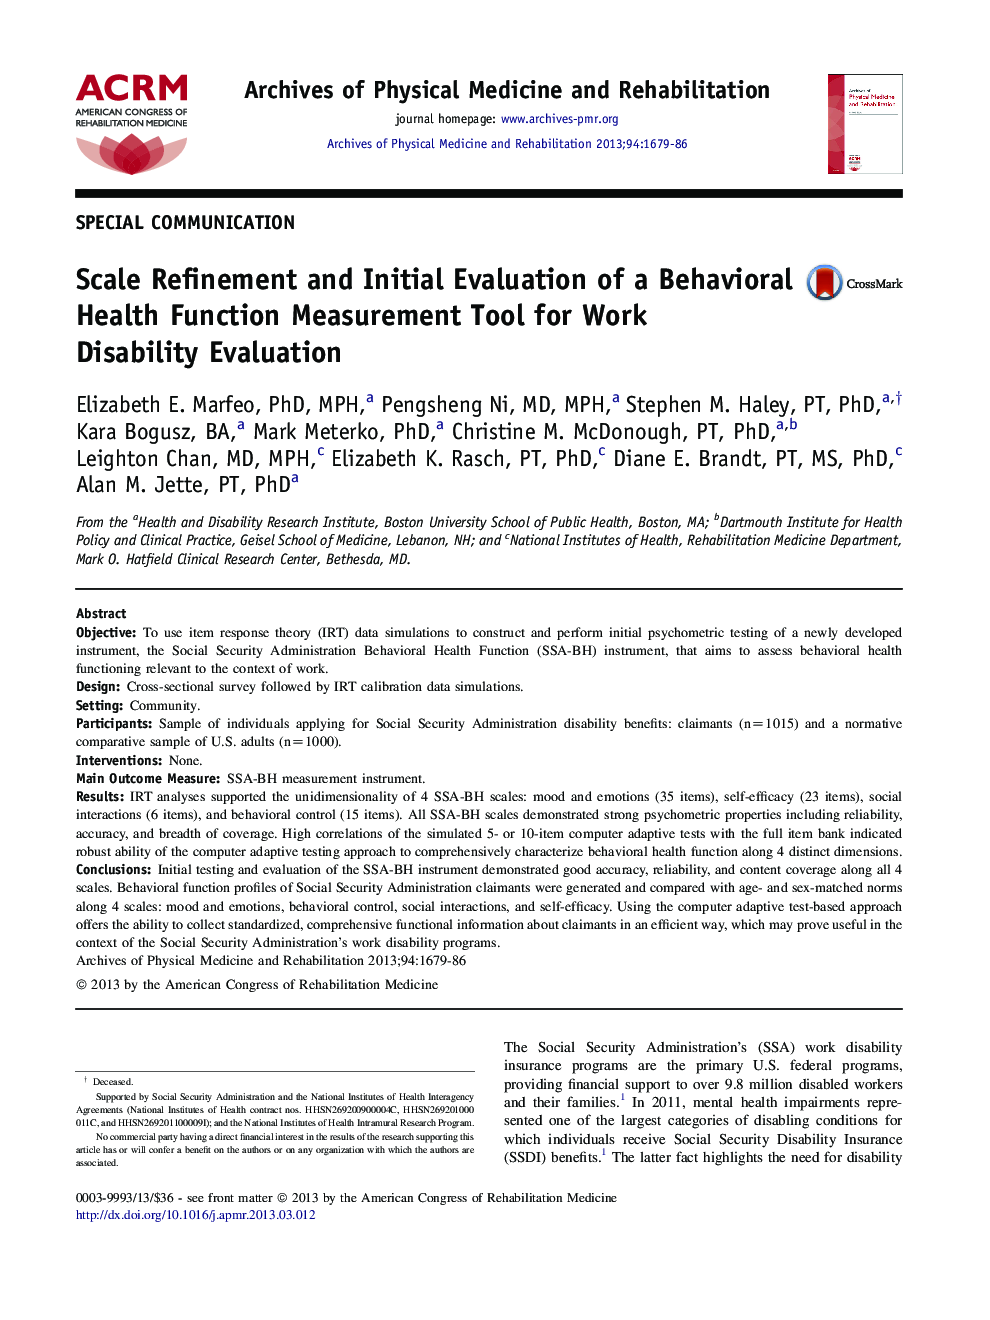 Scale Refinement and Initial Evaluation of a Behavioral Health Function Measurement Tool for Work Disability Evaluation 